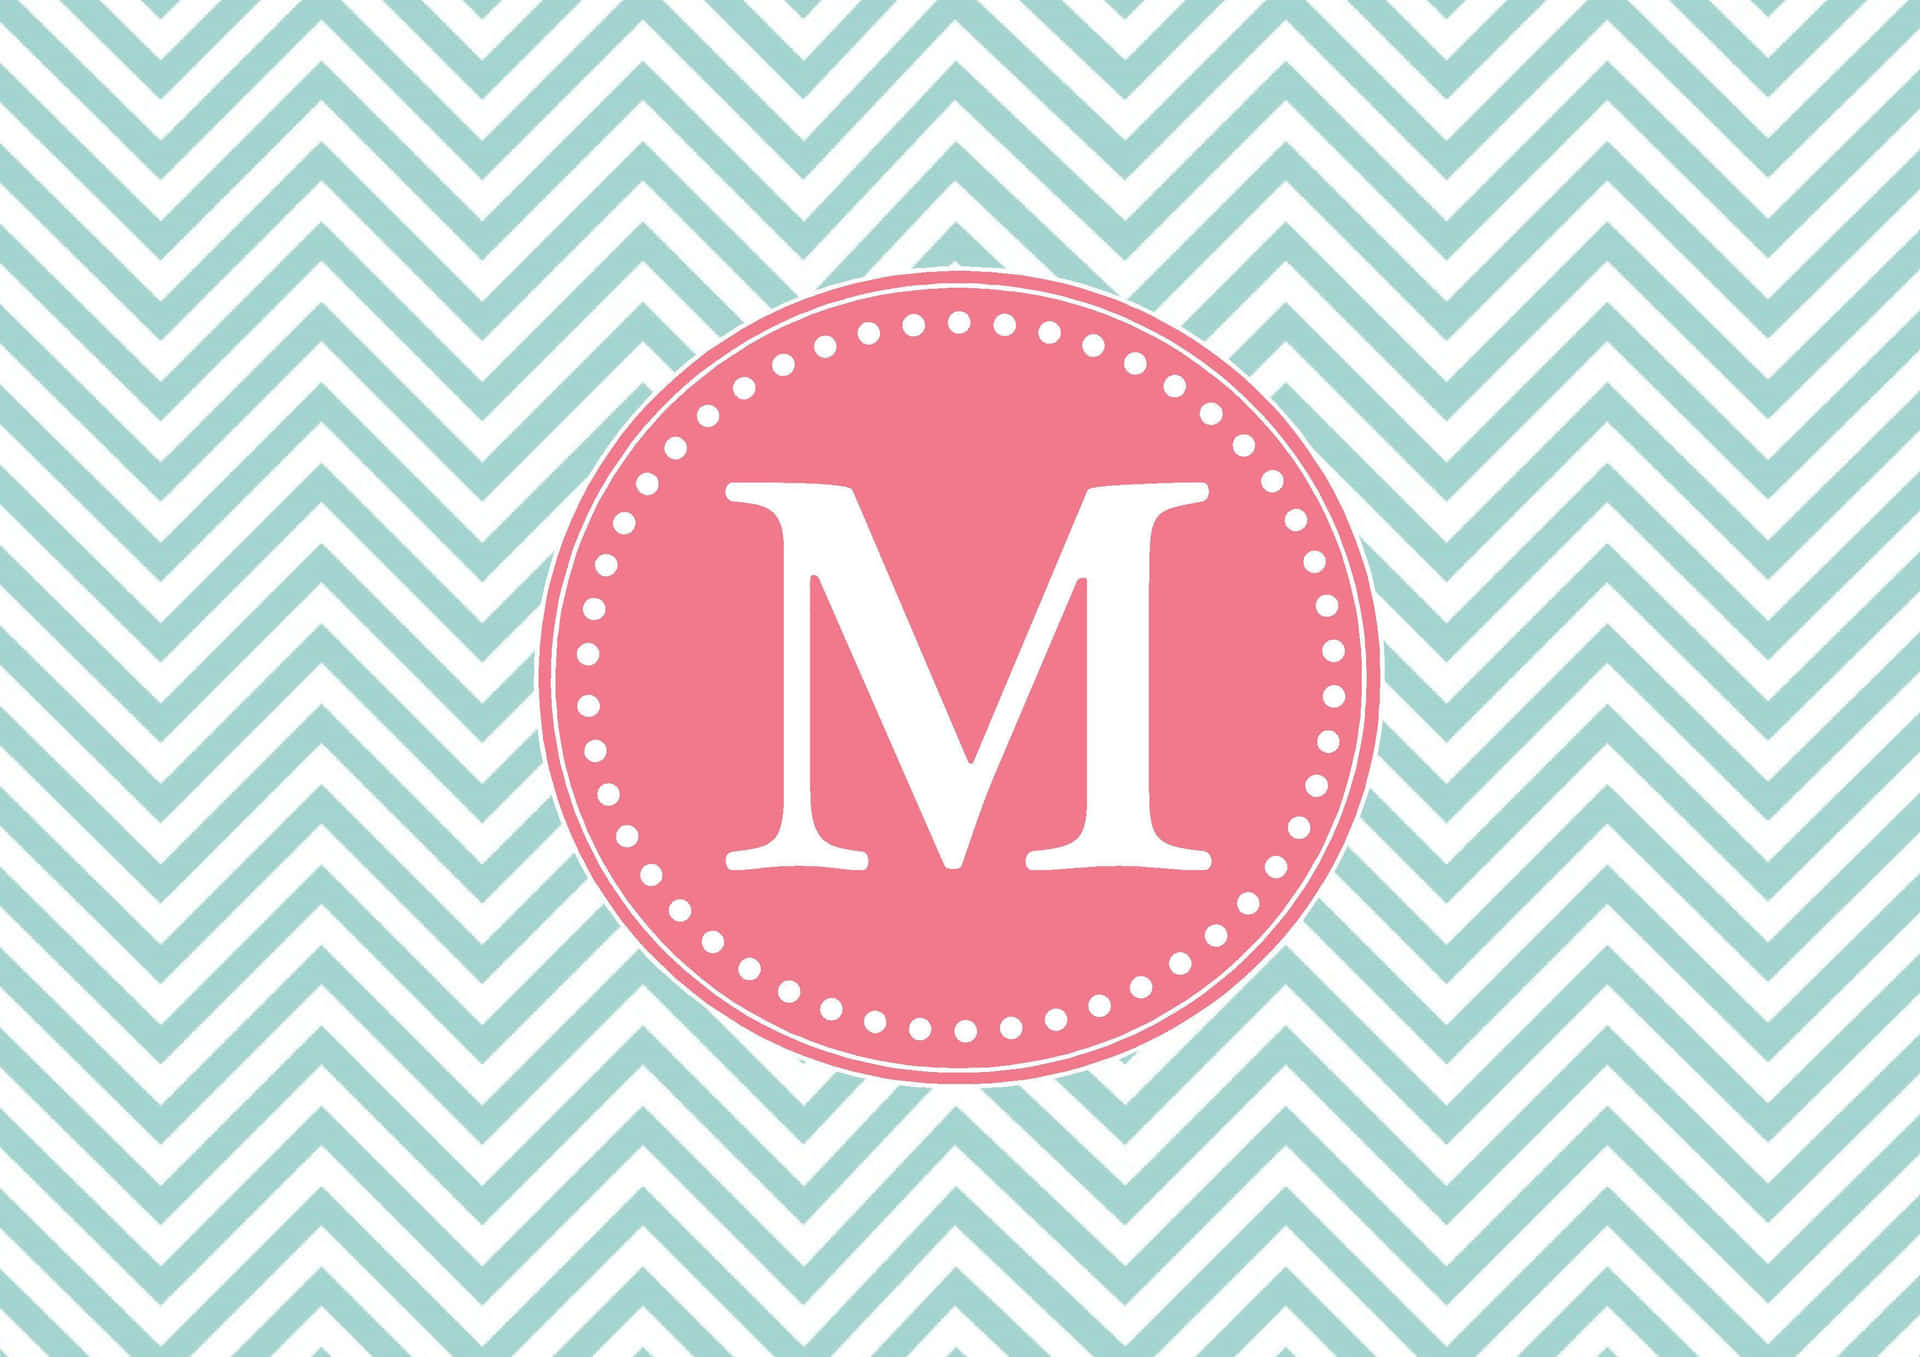 Chevron Pattern With The Letter M Wallpaper